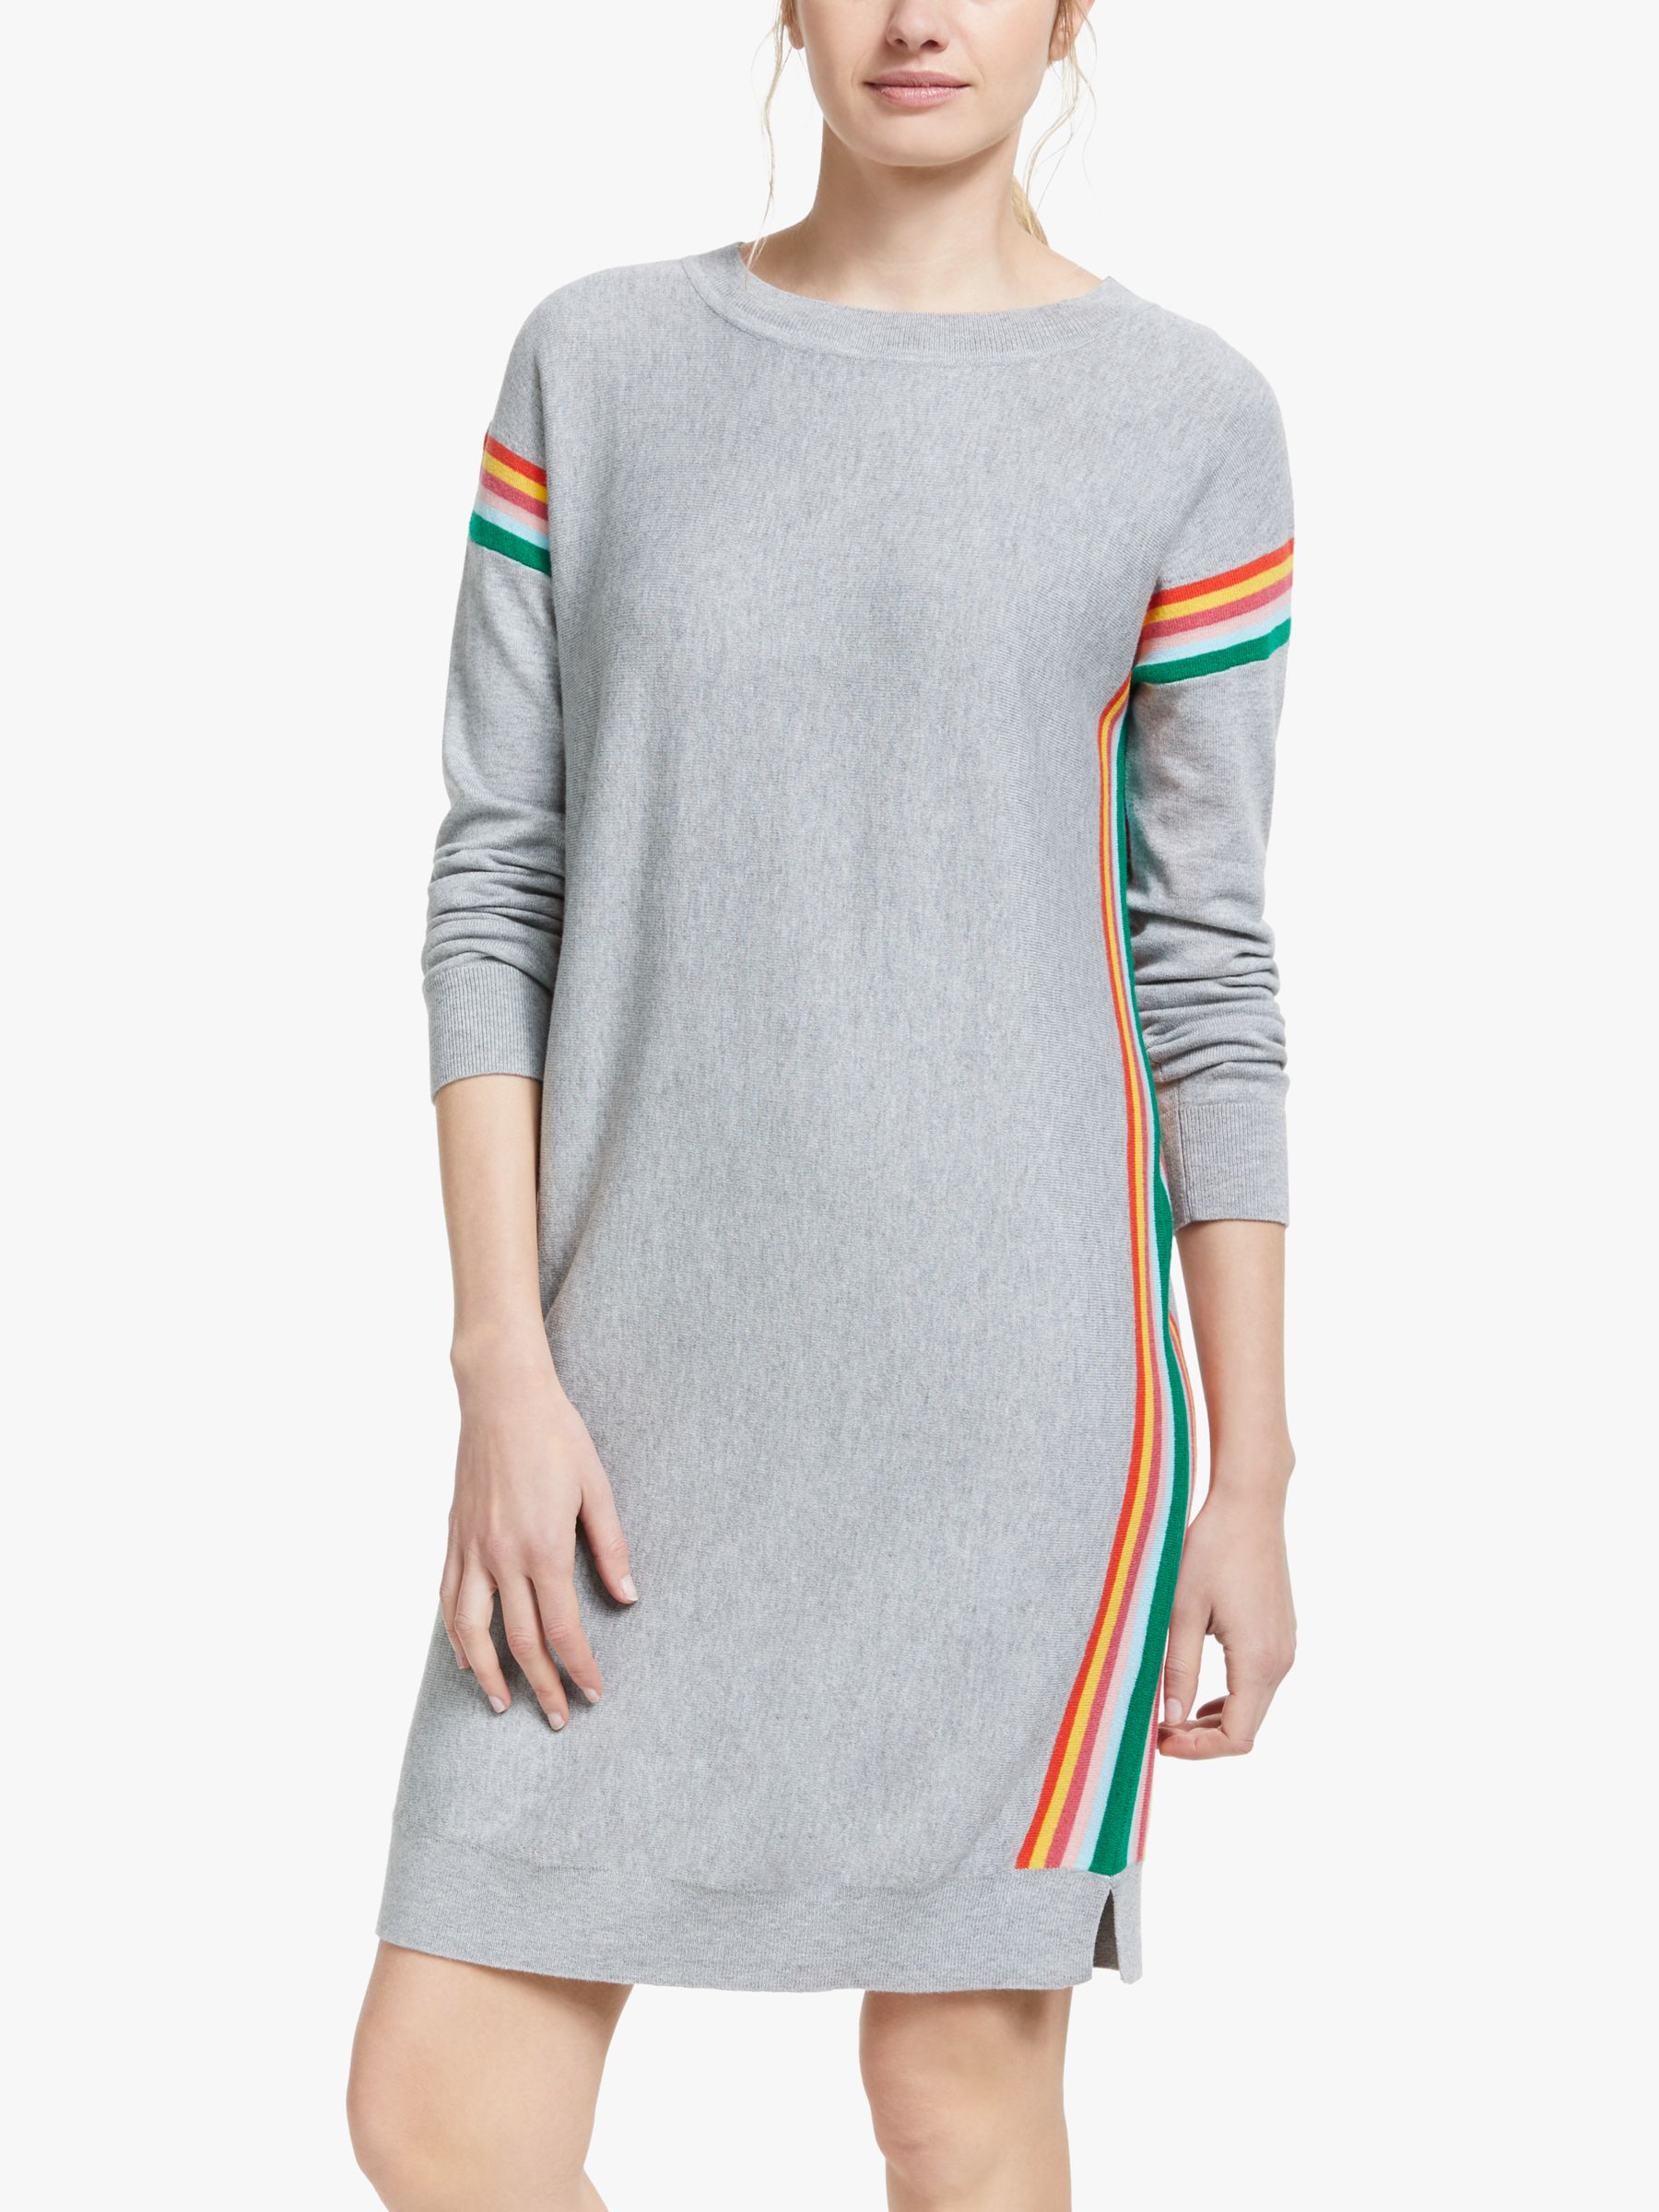 Boden Talise Knitted Dress